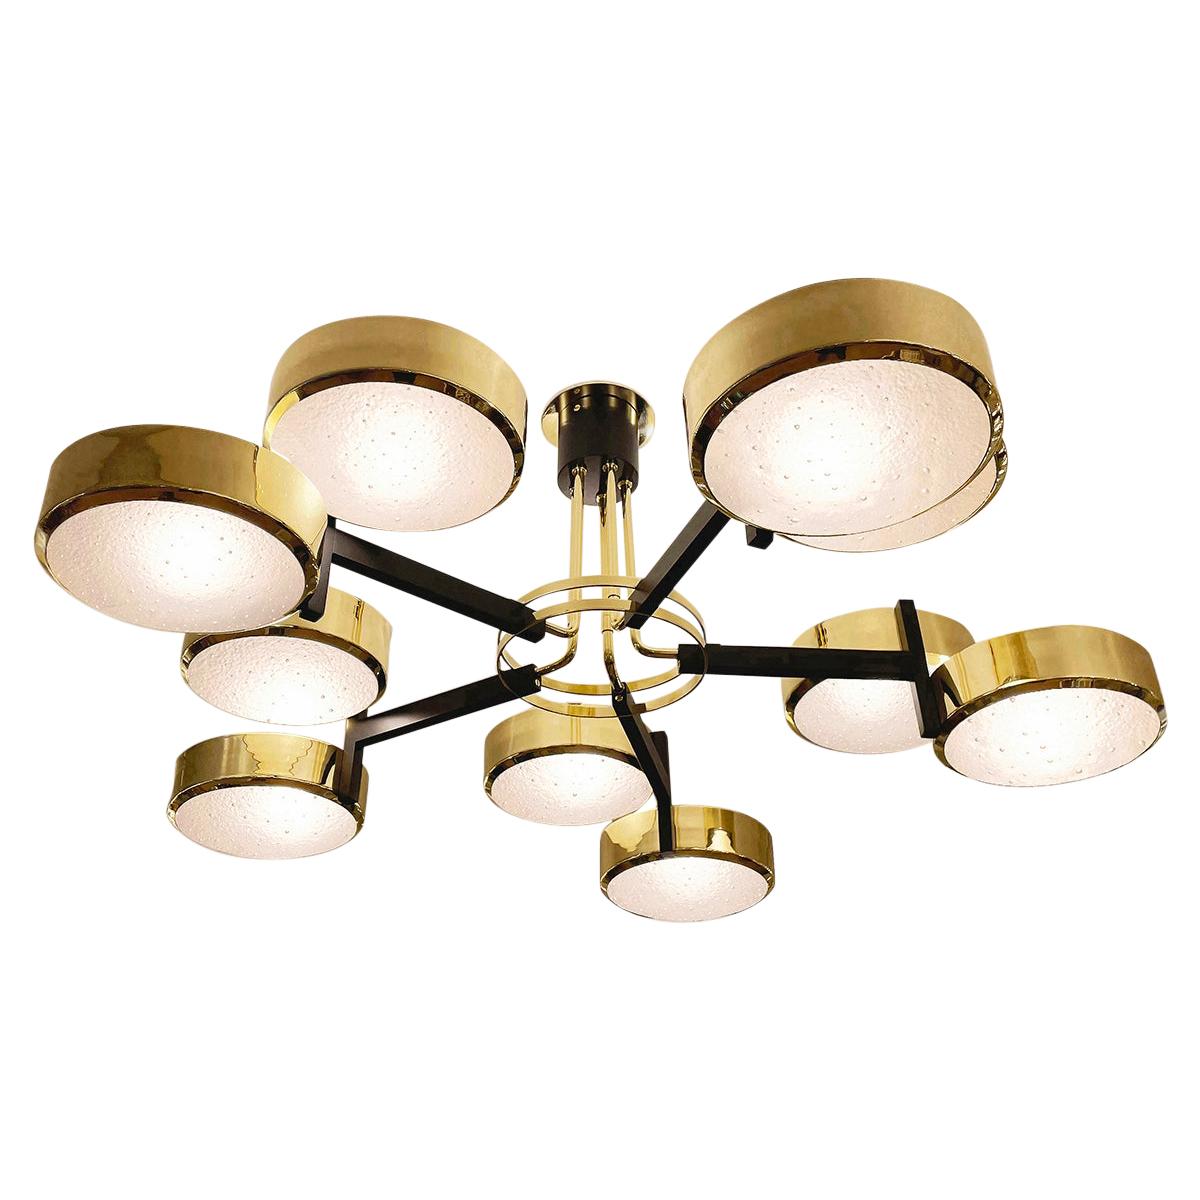 Eclissi Grande Ceiling Light by Gaspare Asaro - Murano Glass Version